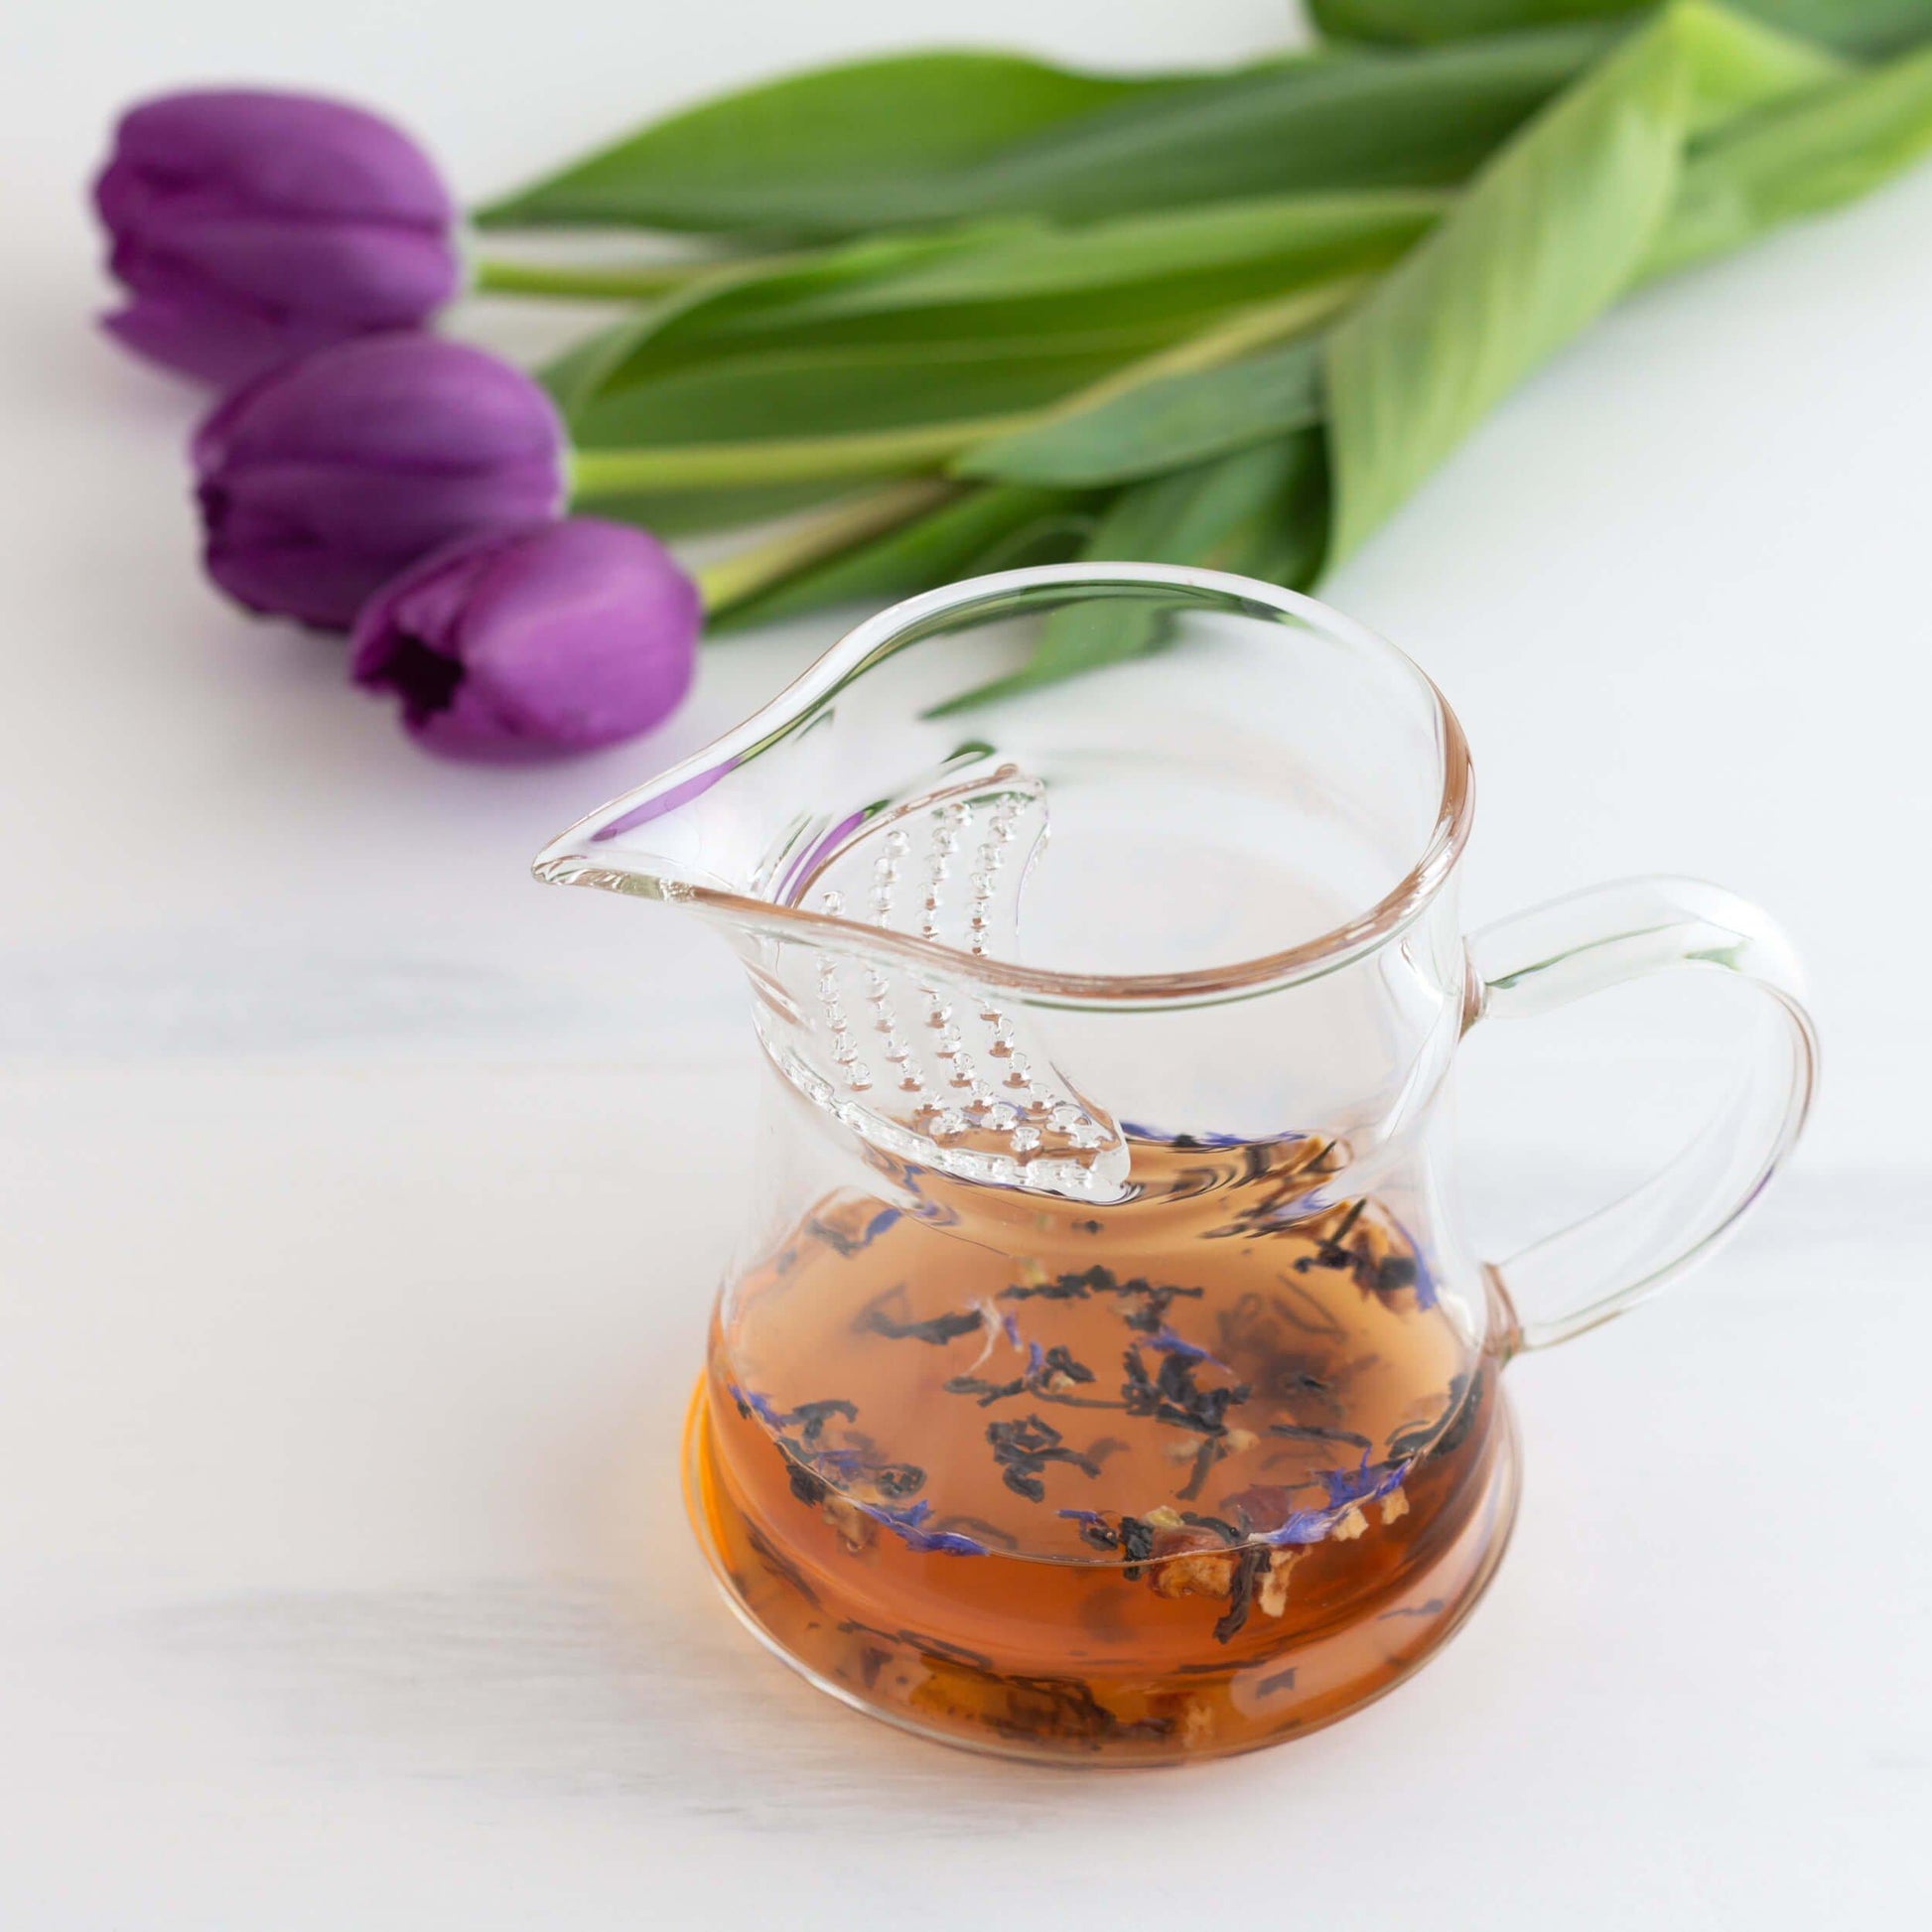 Lychee Purple Leaf Tea shown brewed in a glass pitcher with three purple tulips in background